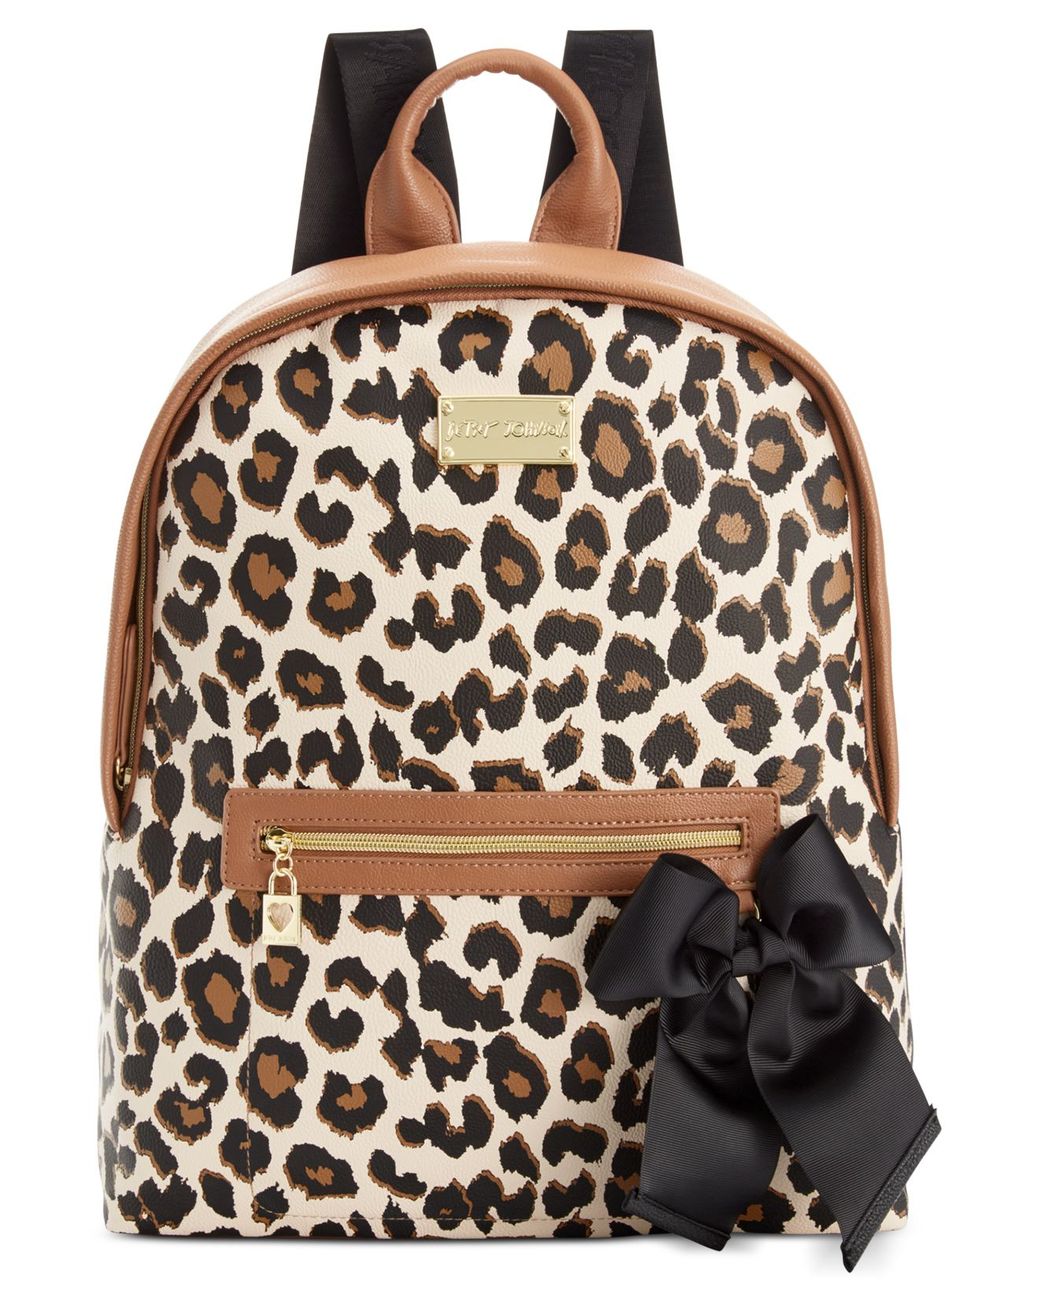 Betsey Johnson Macy's Exclusive Leopard Backpack | Lyst